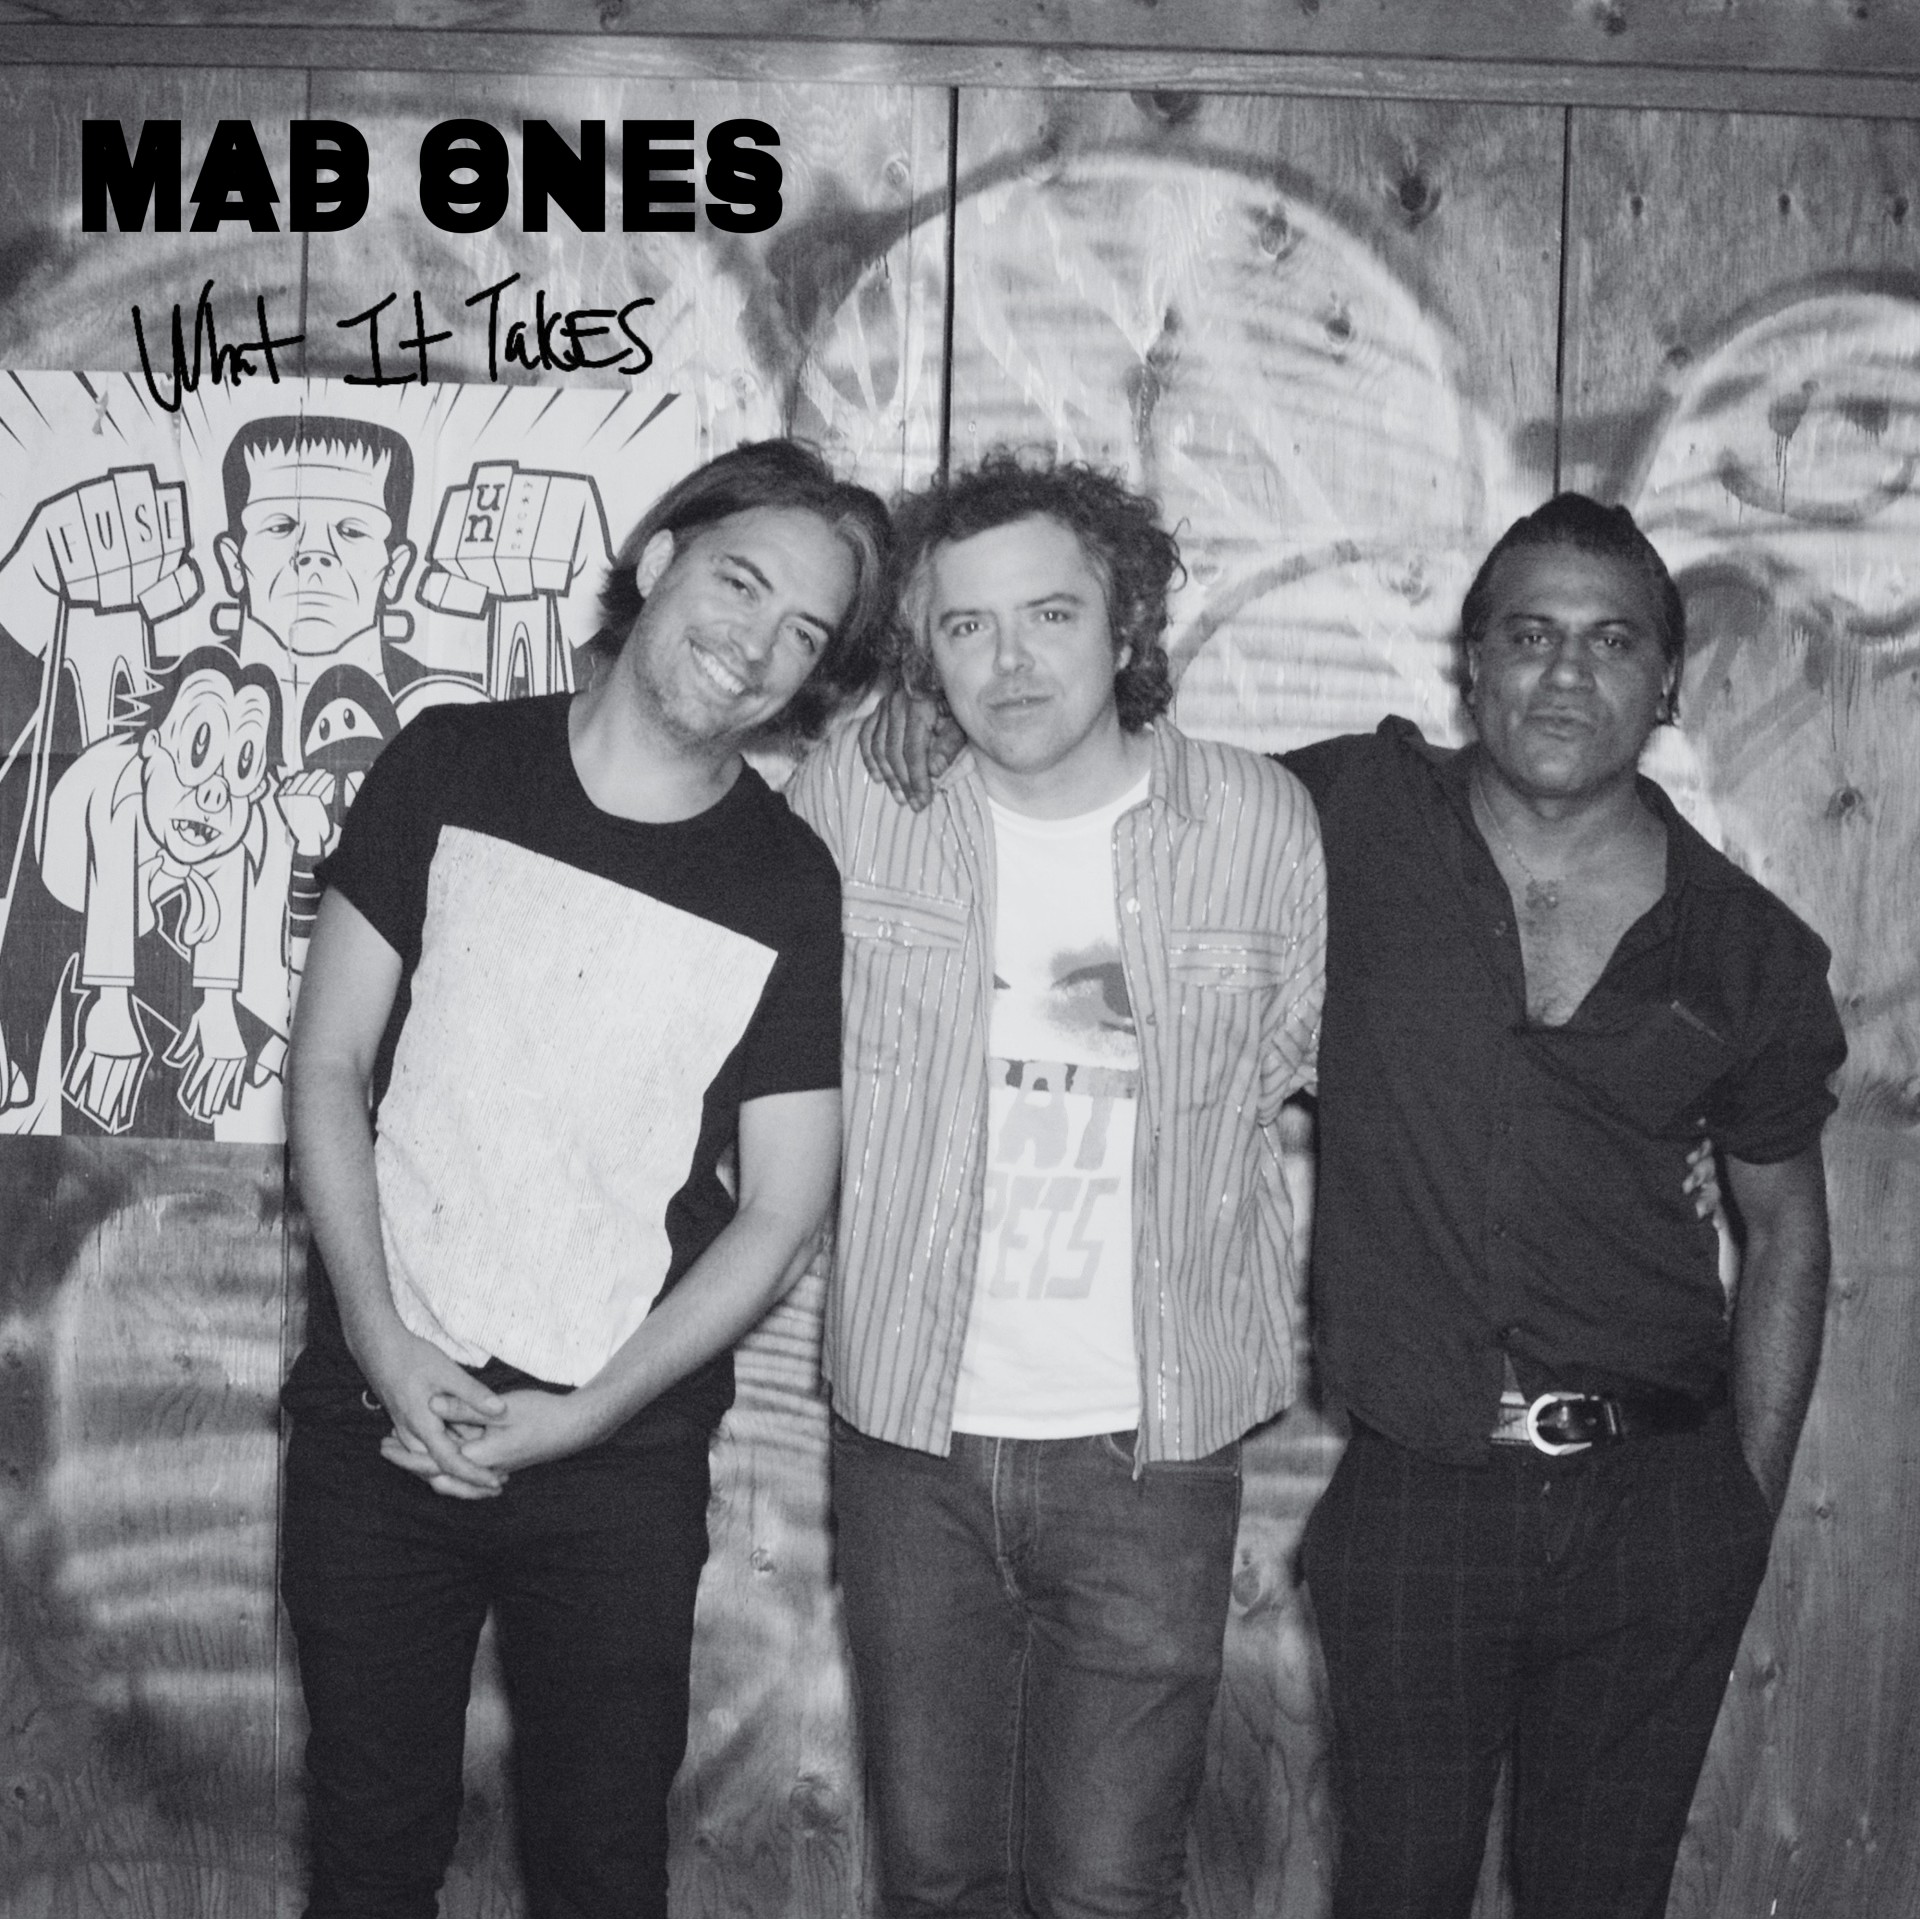 Mad Ones “What It Takes” single artwork